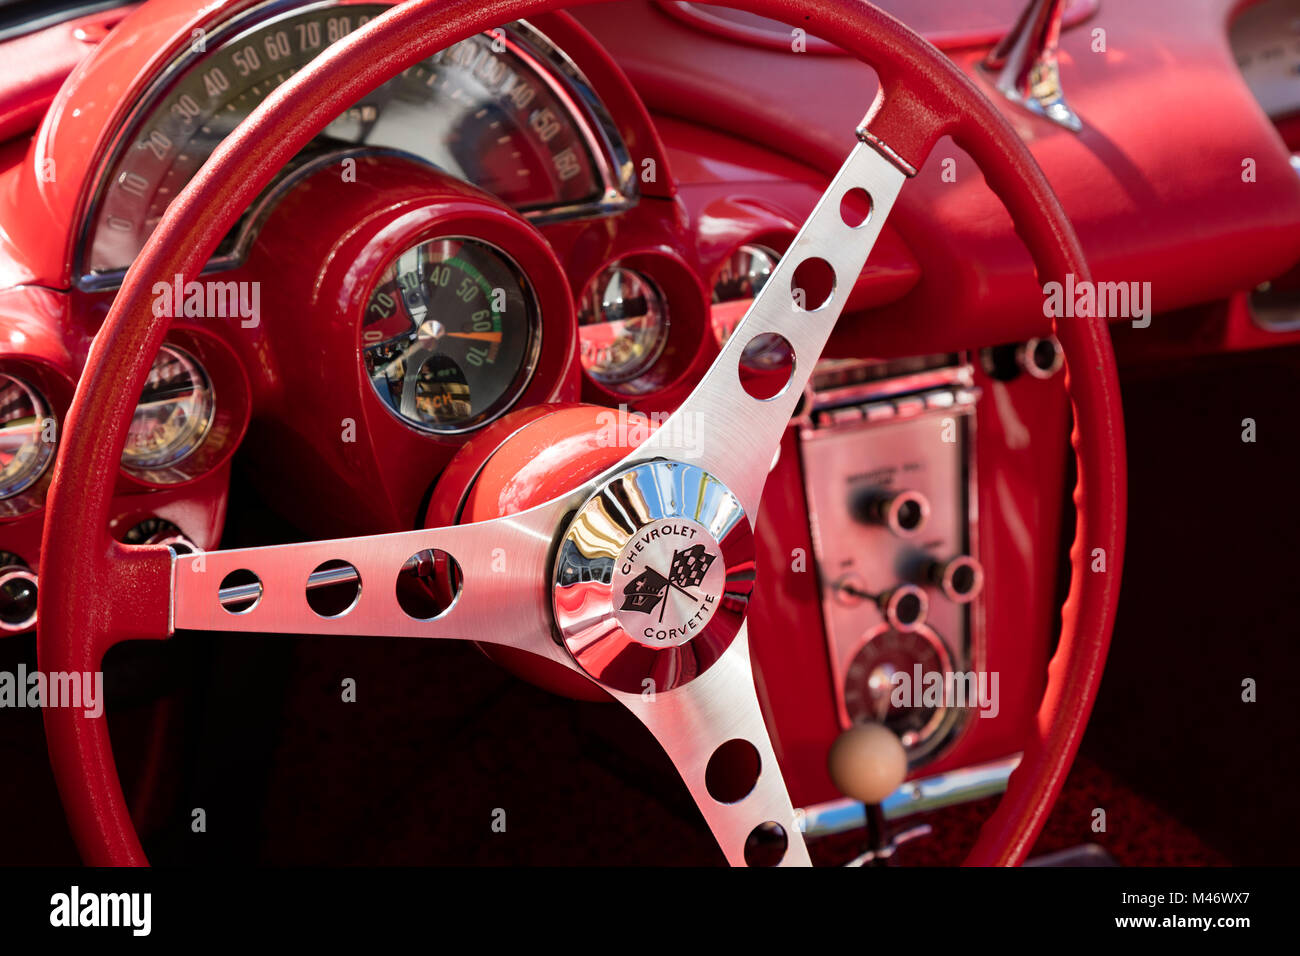 Steering wheel of a 1960 Chevrolet Corvette Stingray on display at 'Cars on 5th' autoshow, Naples, Florida, USA Stock Photo